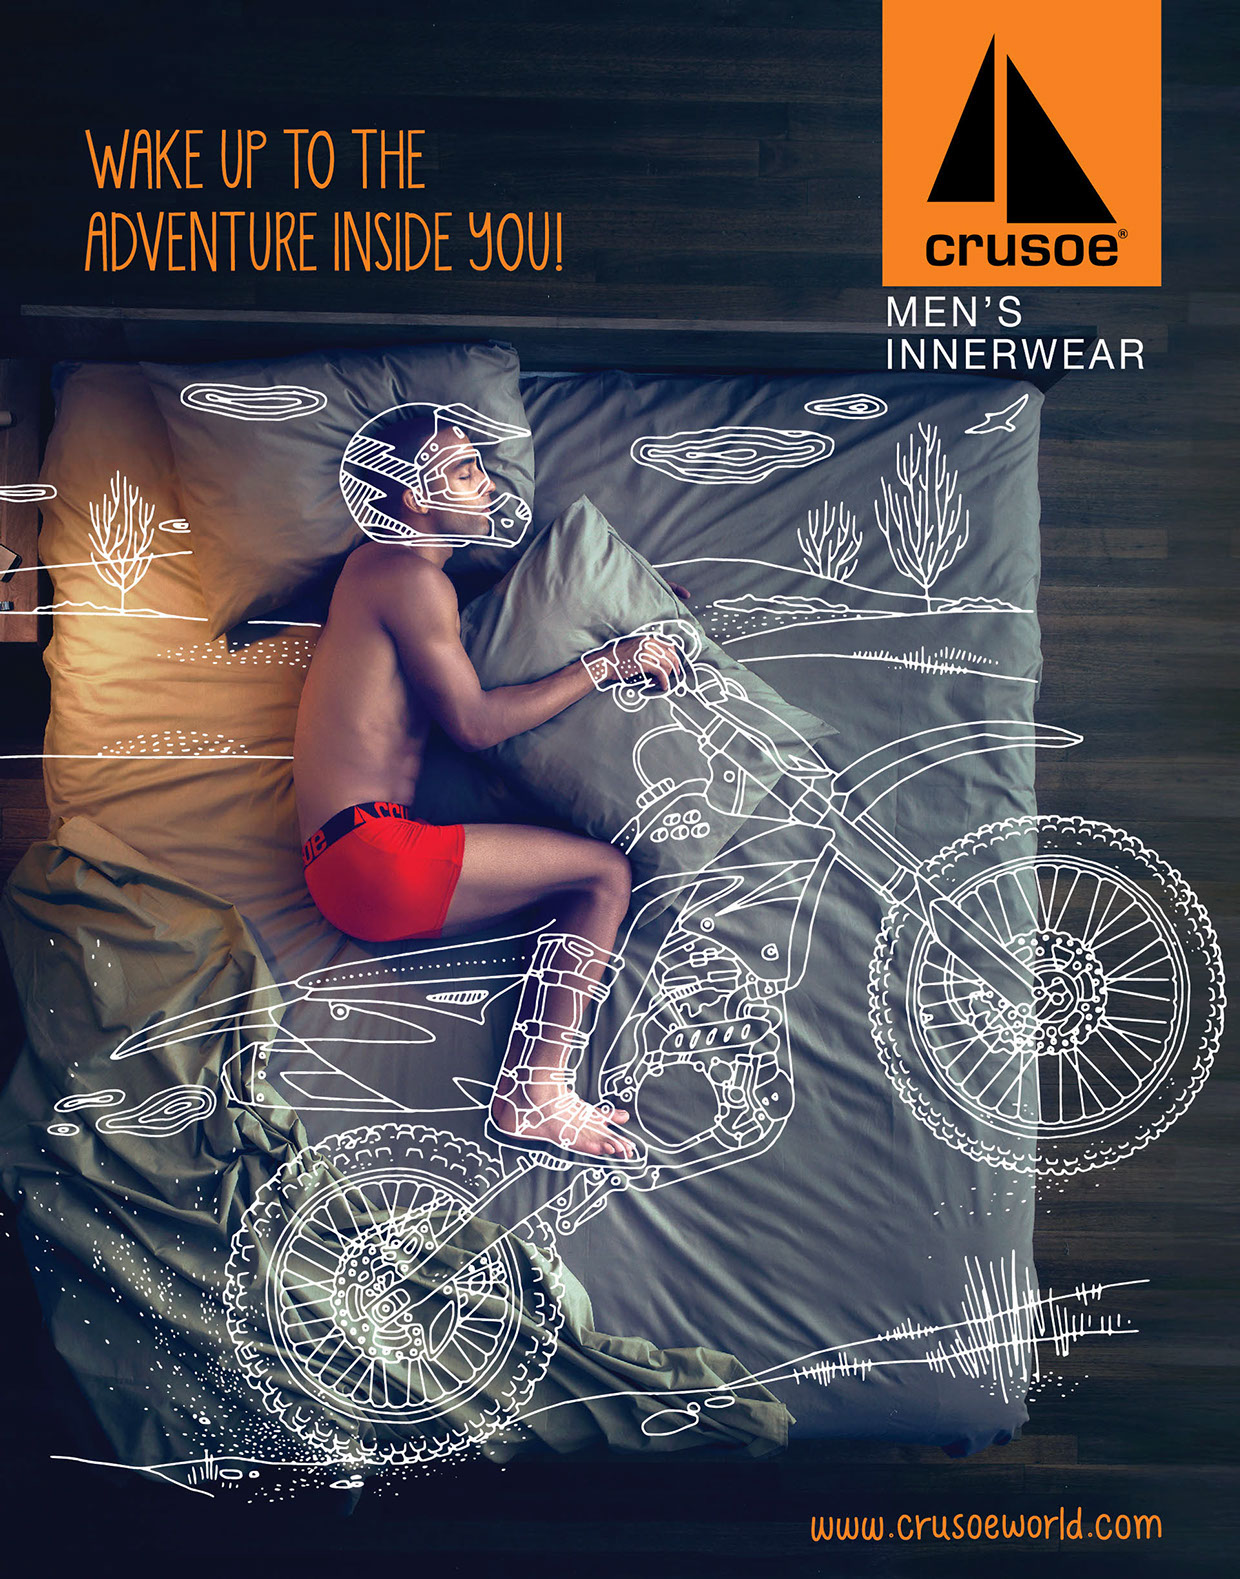 Wake up to the adventure inside you! Crusoe Men's Innerwear Campaigns of the World®